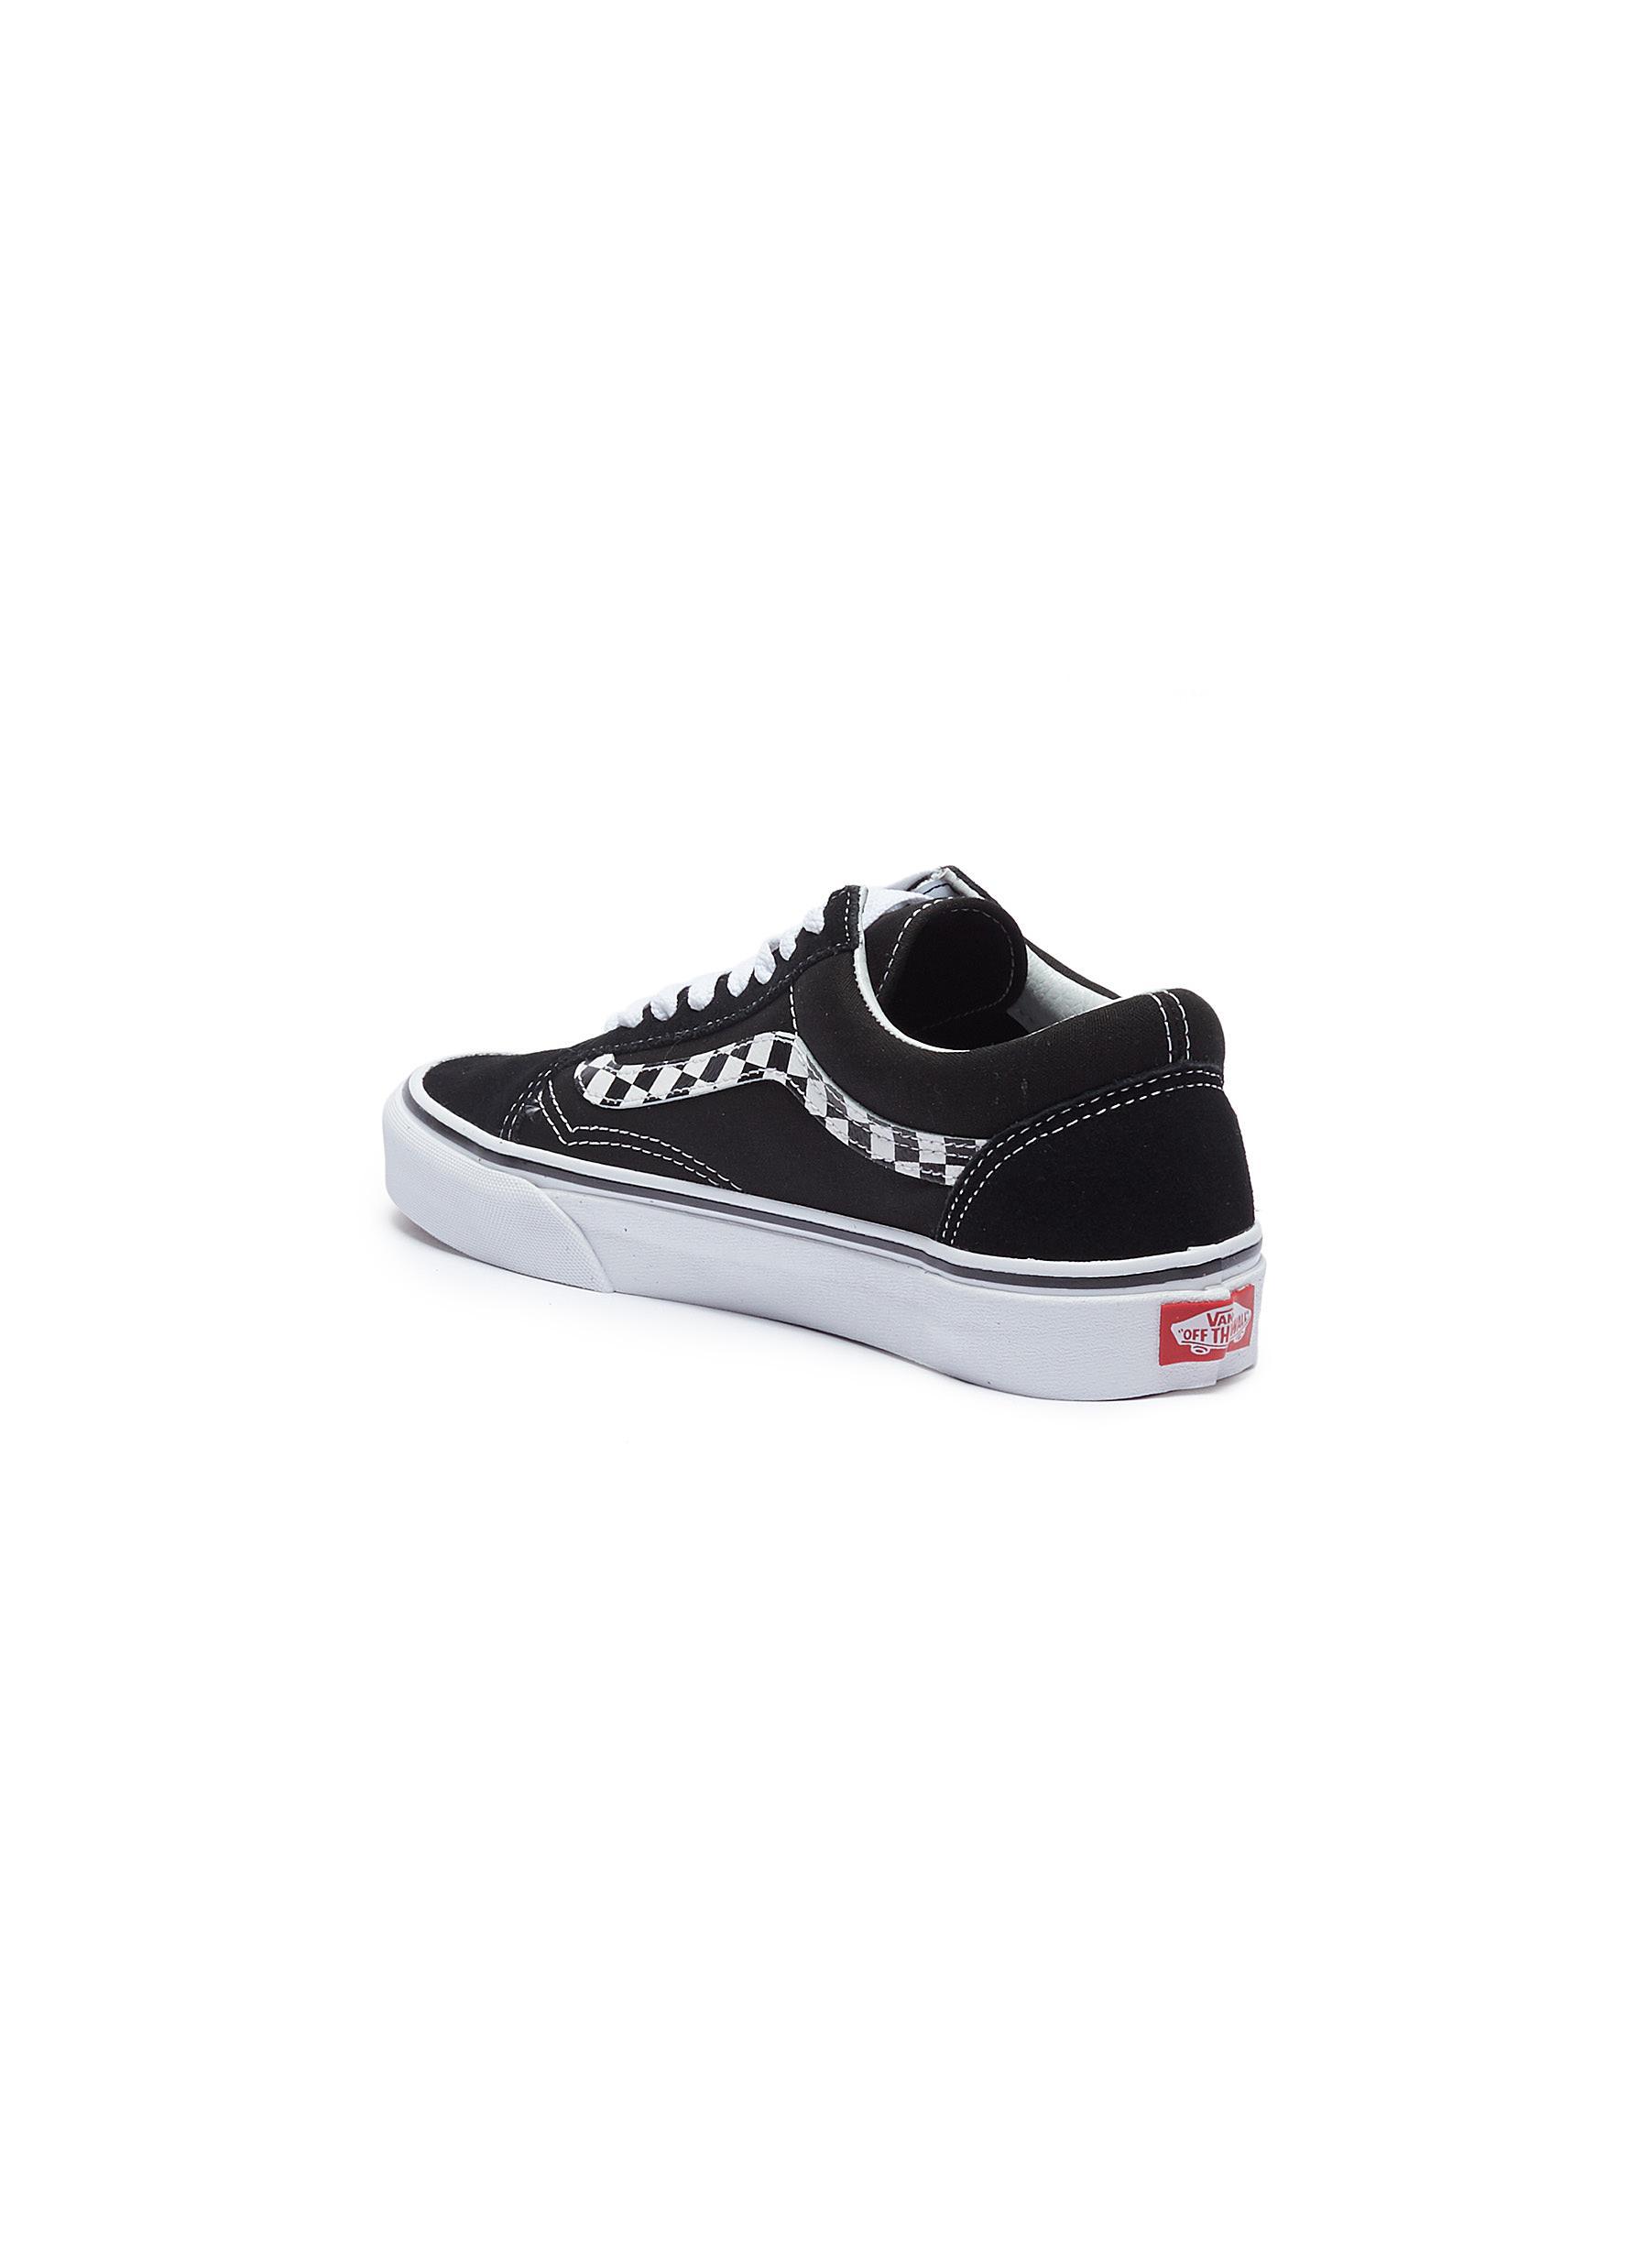 Vans 'checker Floral Old Skool' Graphic Embroidered Sneakers in Black | Lyst